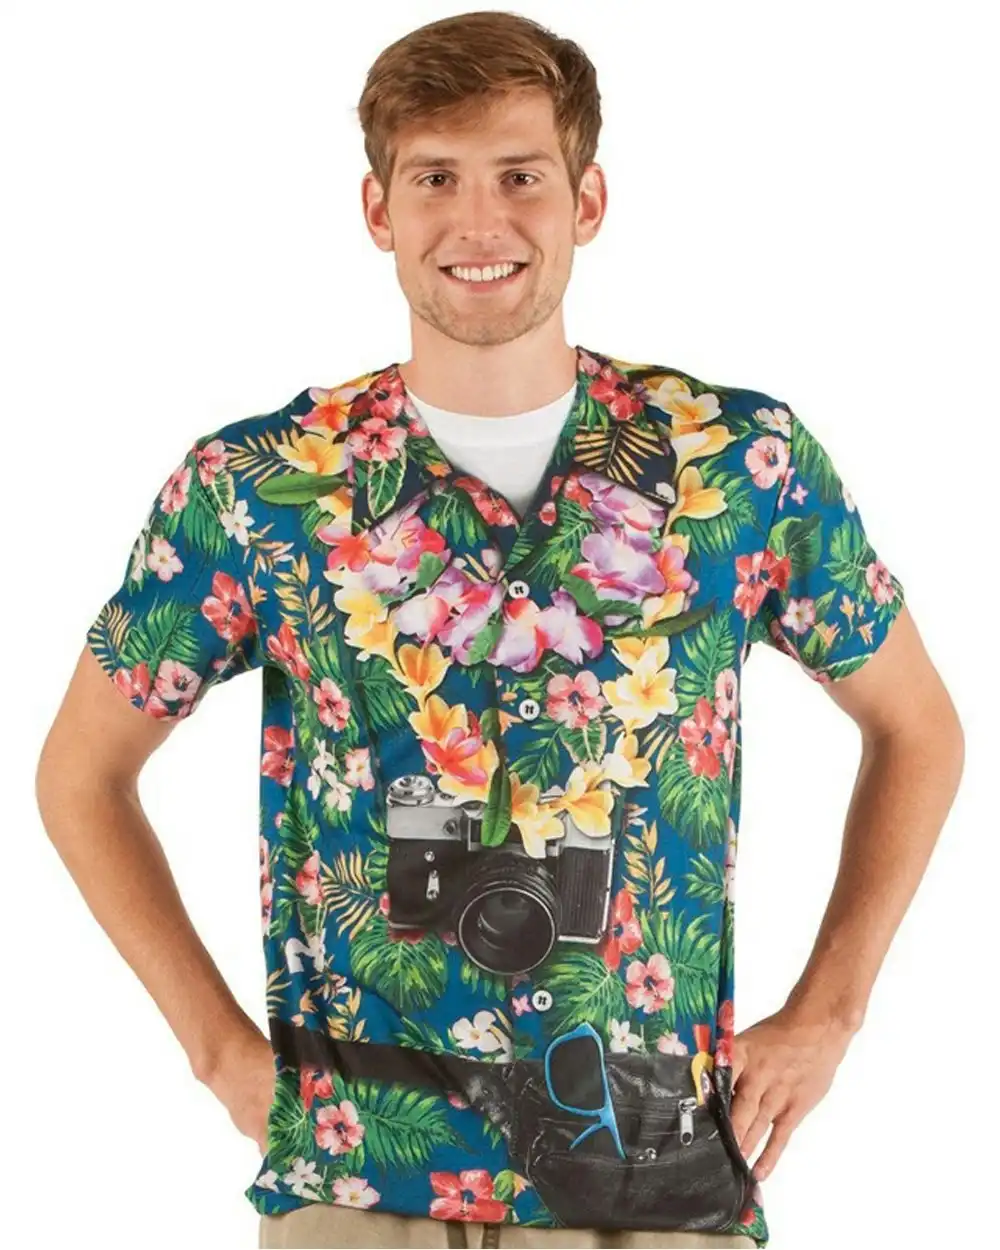 Faux Real Tourist T-Shirt Costume